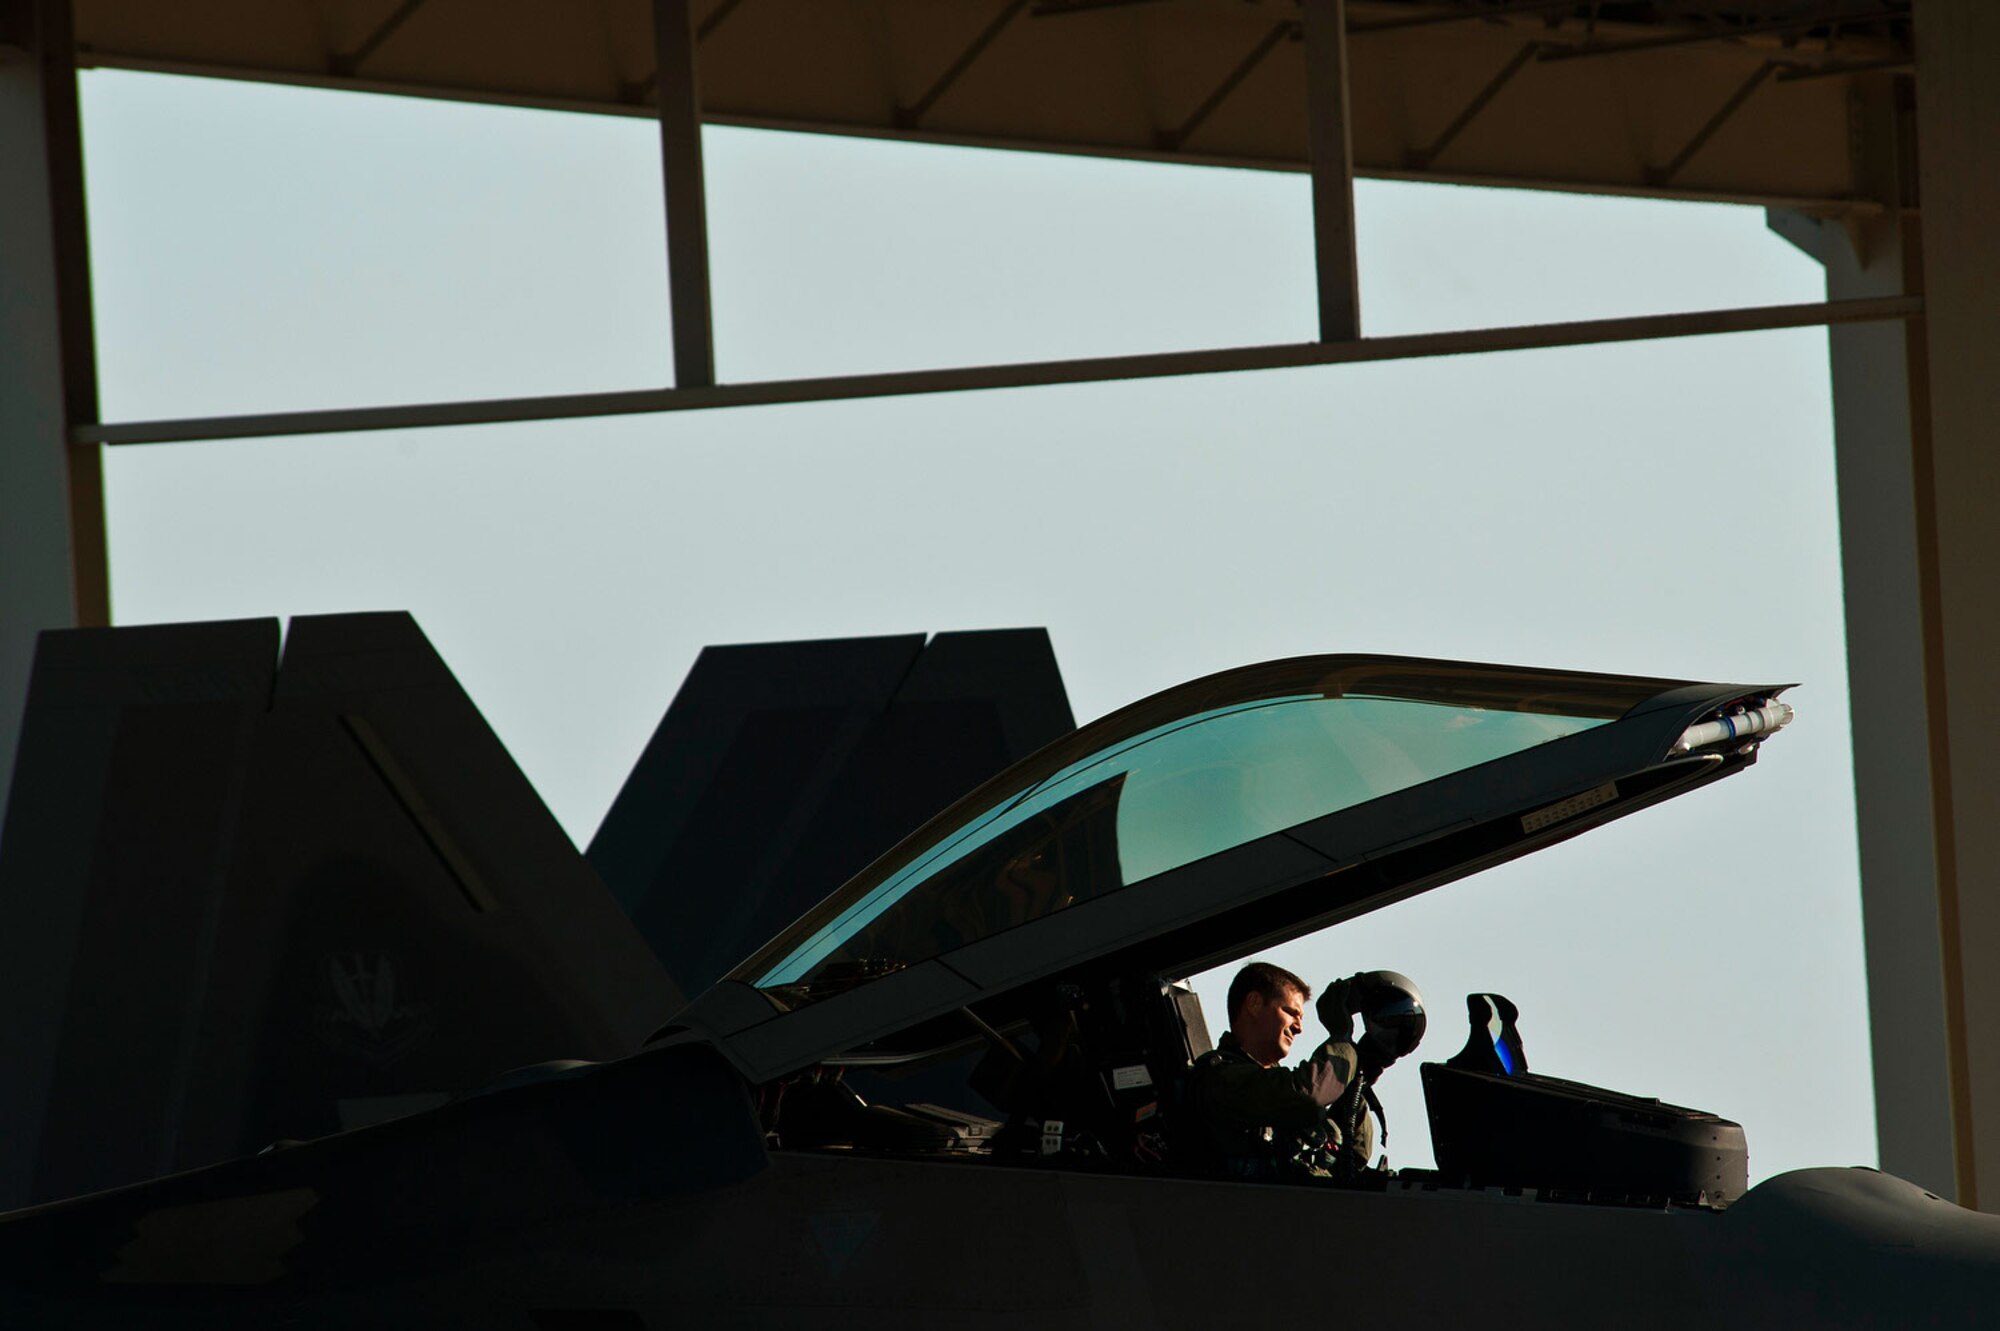 Lt. Col. David Lopez inspects his helmet inside the cockpit of an F-22 Raptor while preparing for takeoff. Lopez is the deputy director of operations for the 1st Operations Support Squadron. (U.S. Air Force photo/Tech. Sgt. Bennie J. Davis III)